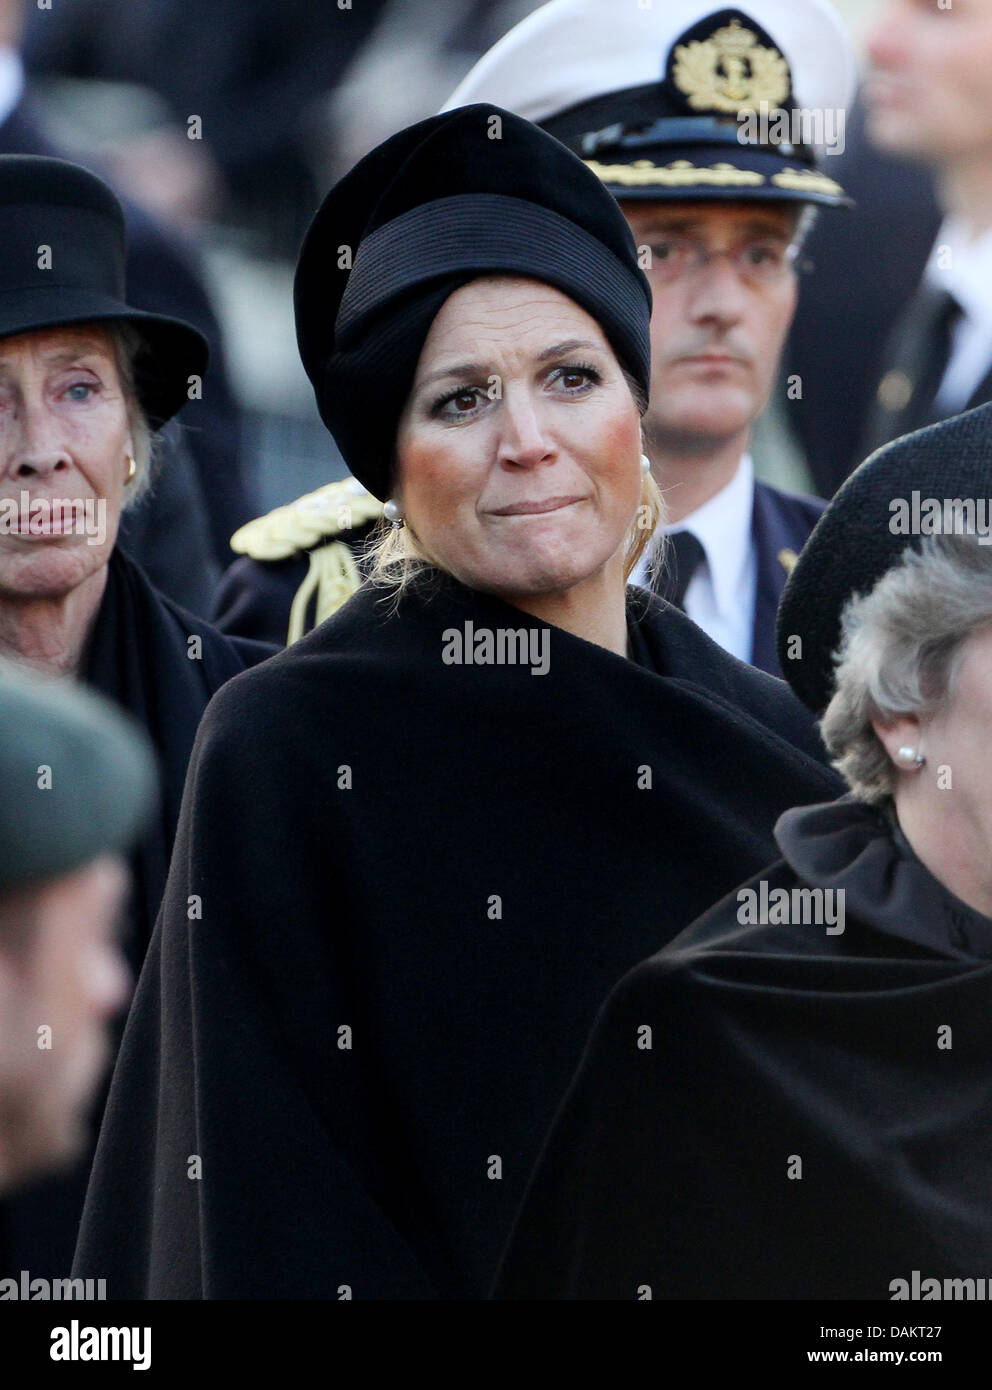 Princess Maxima of The Netherlands attends the National Remembrance Day ceremony to commemorate the victims of World War II at the Dam square in Amsterdam, The Netherlands, 4 May 2011. Photo: Patrick van Katwijk NETHERLANDS OUT Stock Photo